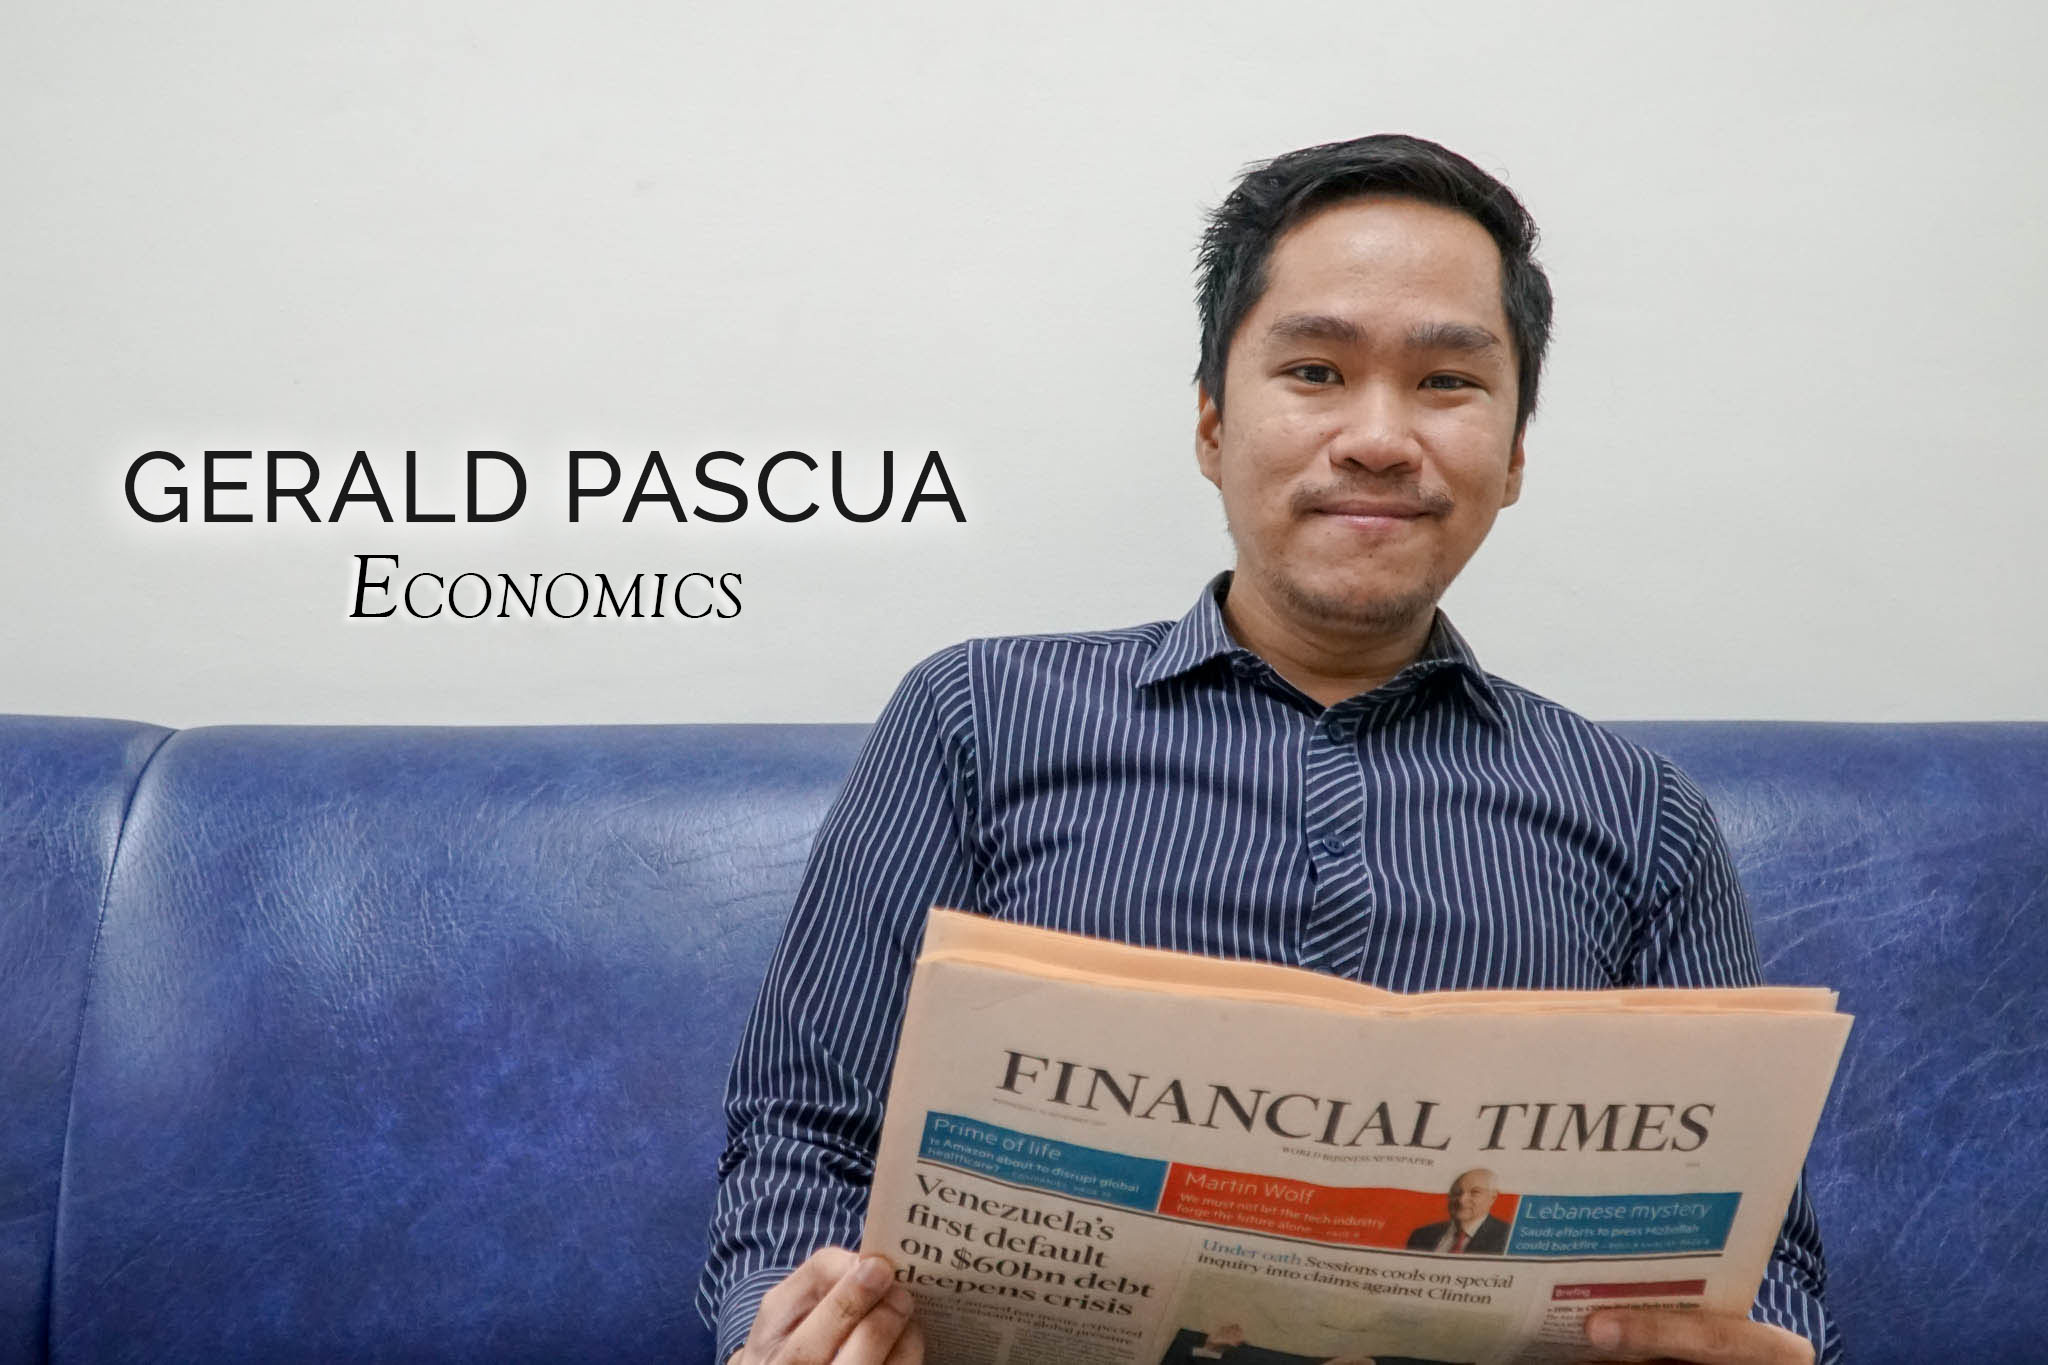 Gerald Pascua: It’s All in the Balance